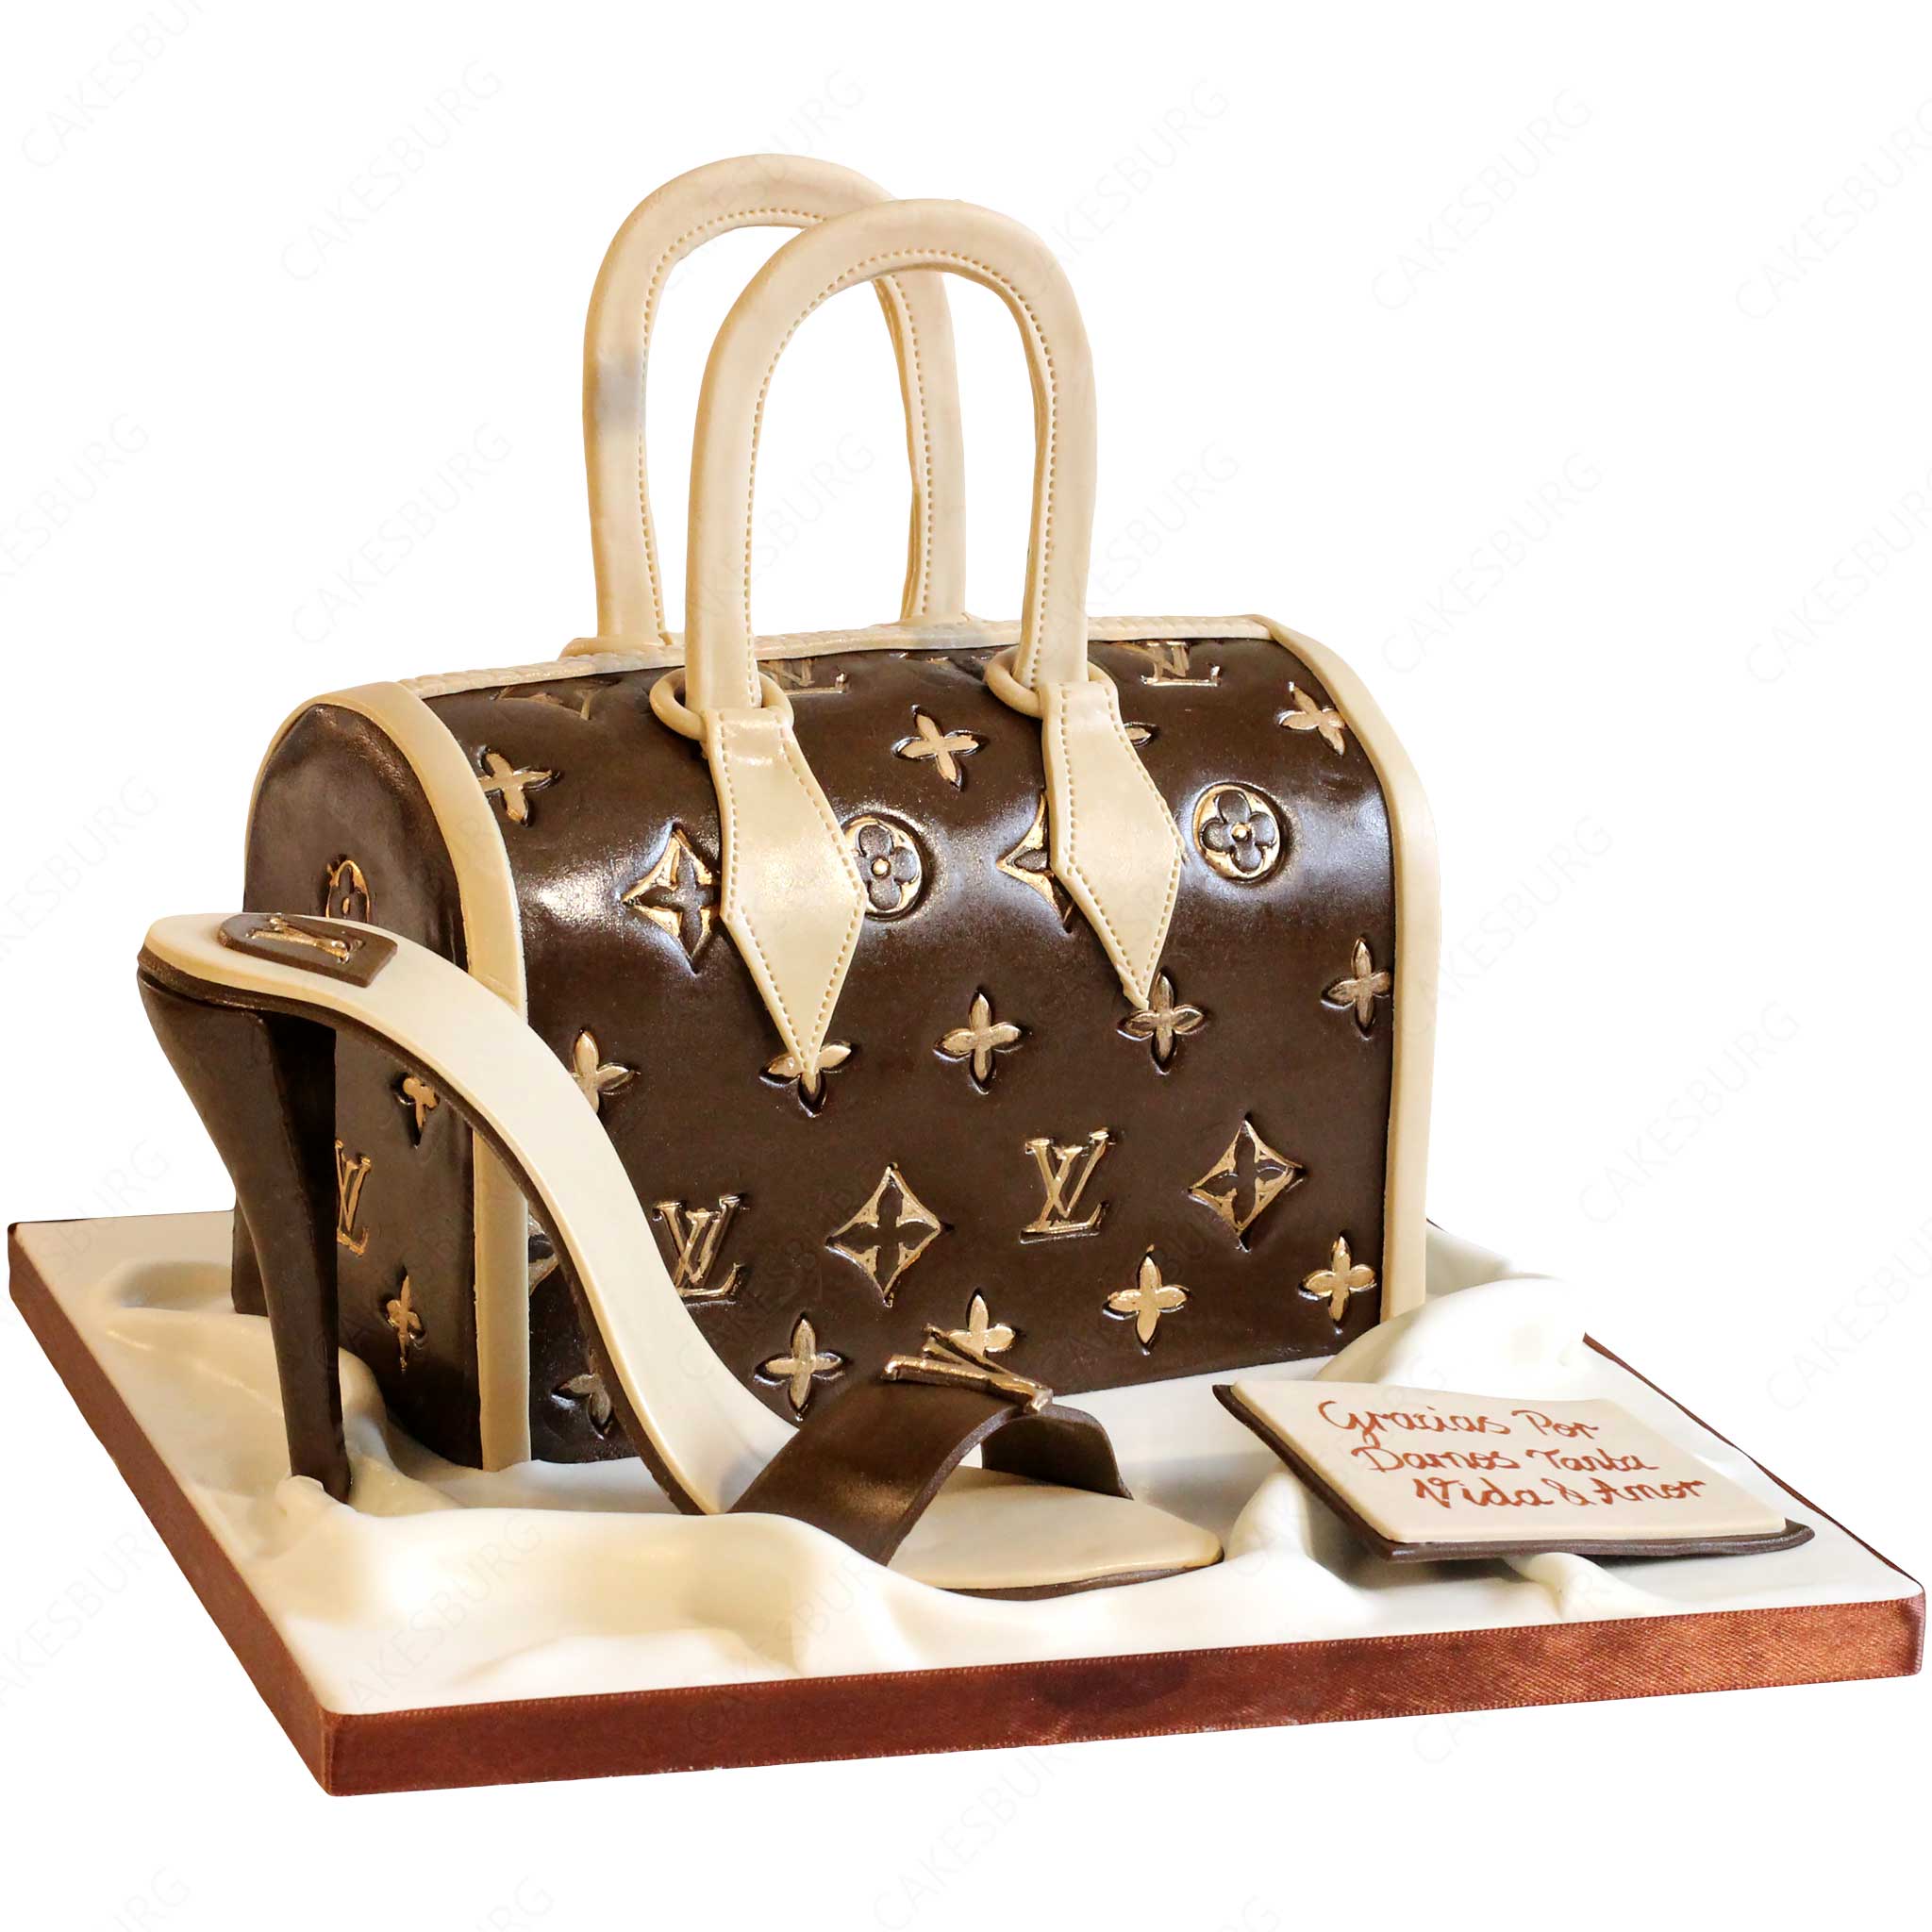 Louis Vuitton Cake  Simply Sweet Creations  Flickr